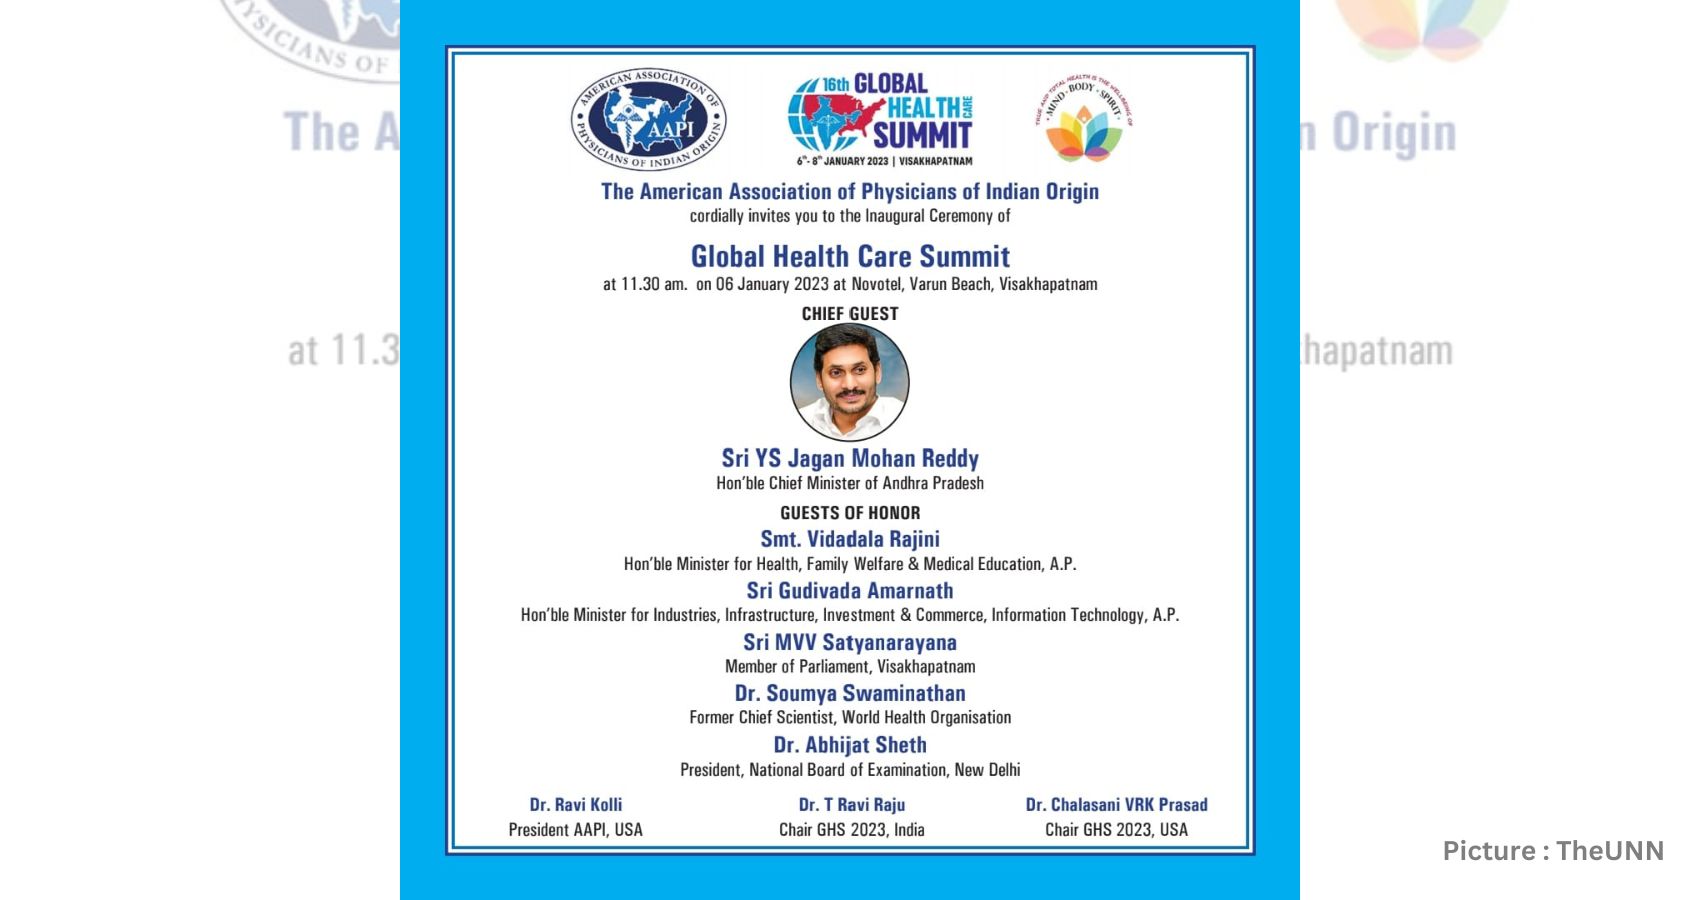 AAPI’s 16th Annual Global Health Summit to be Inaugurated by Shri. YS Jagan Mohan Reddy, Chief Minister of Andhra Pradesh in Visakhapatnam on January 6th, 2023